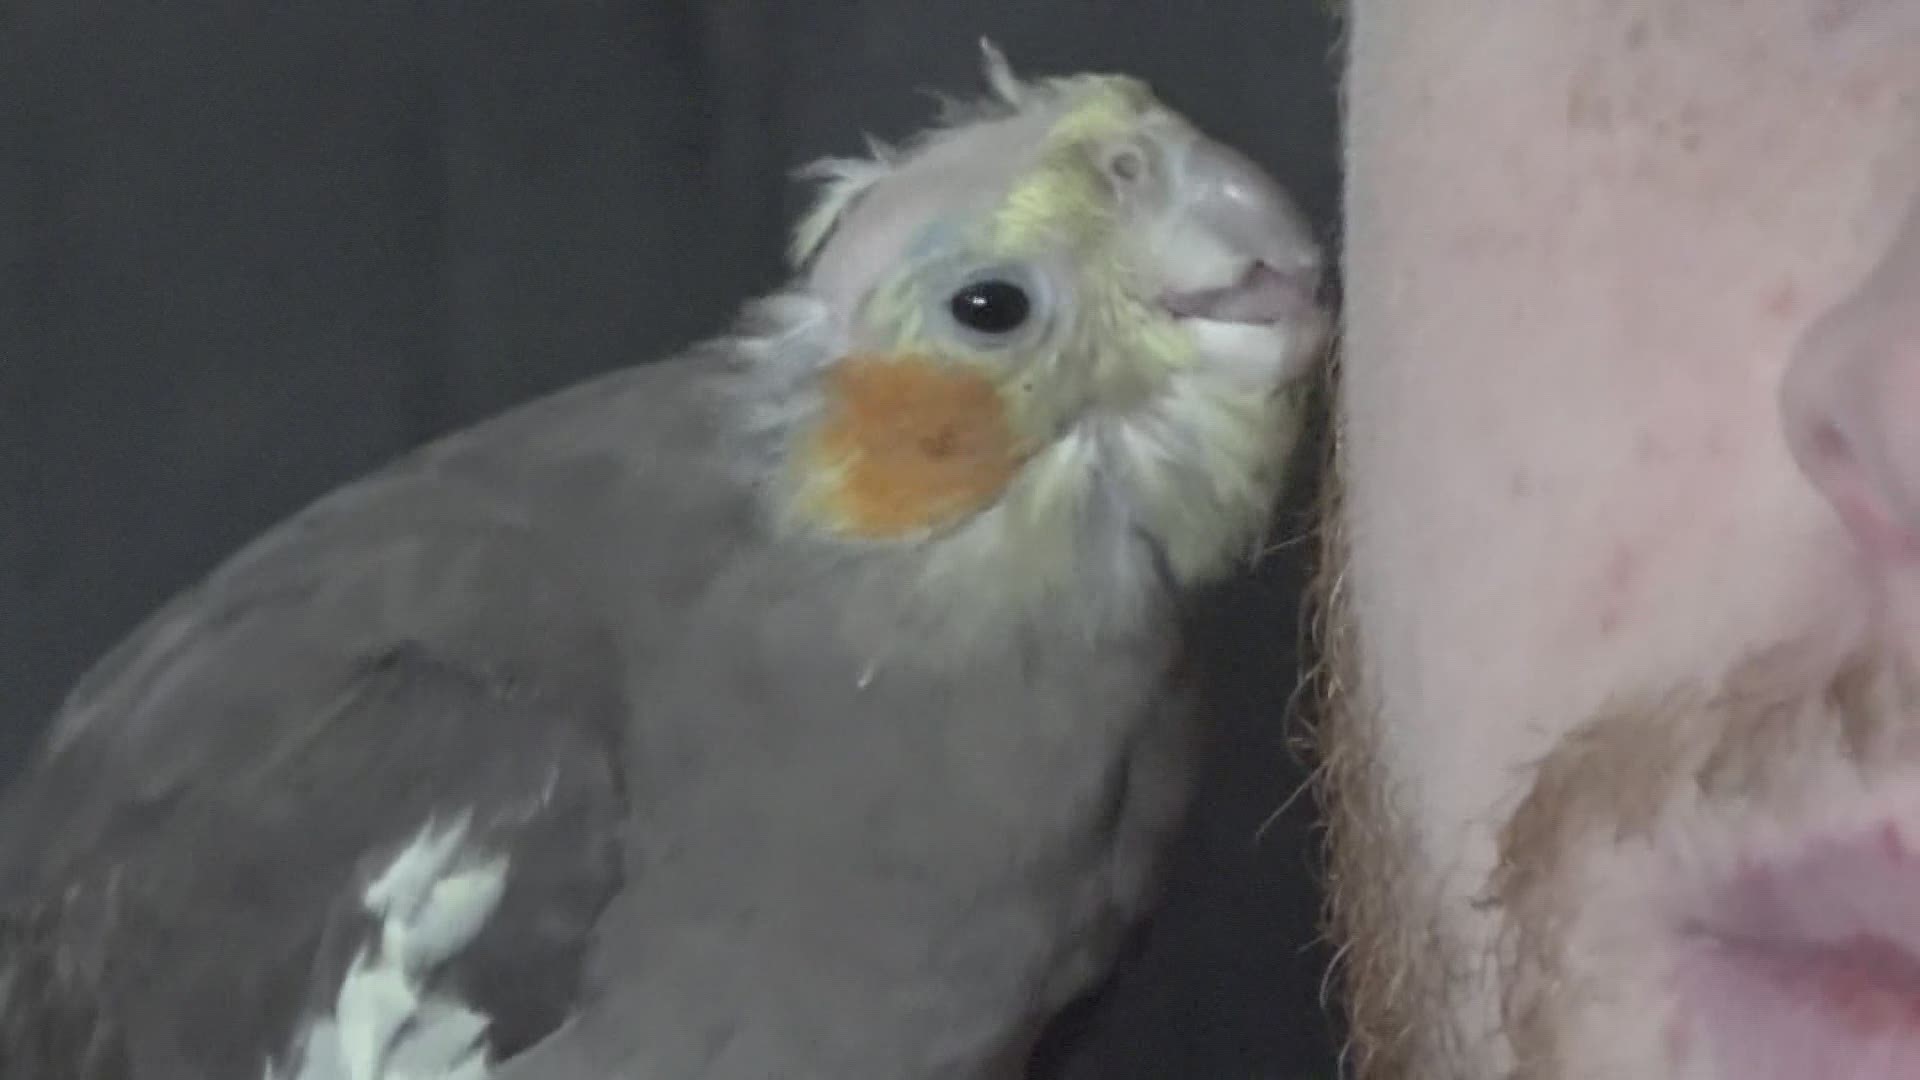 Missing pet cockatiel from West Michigan found near Lansing.